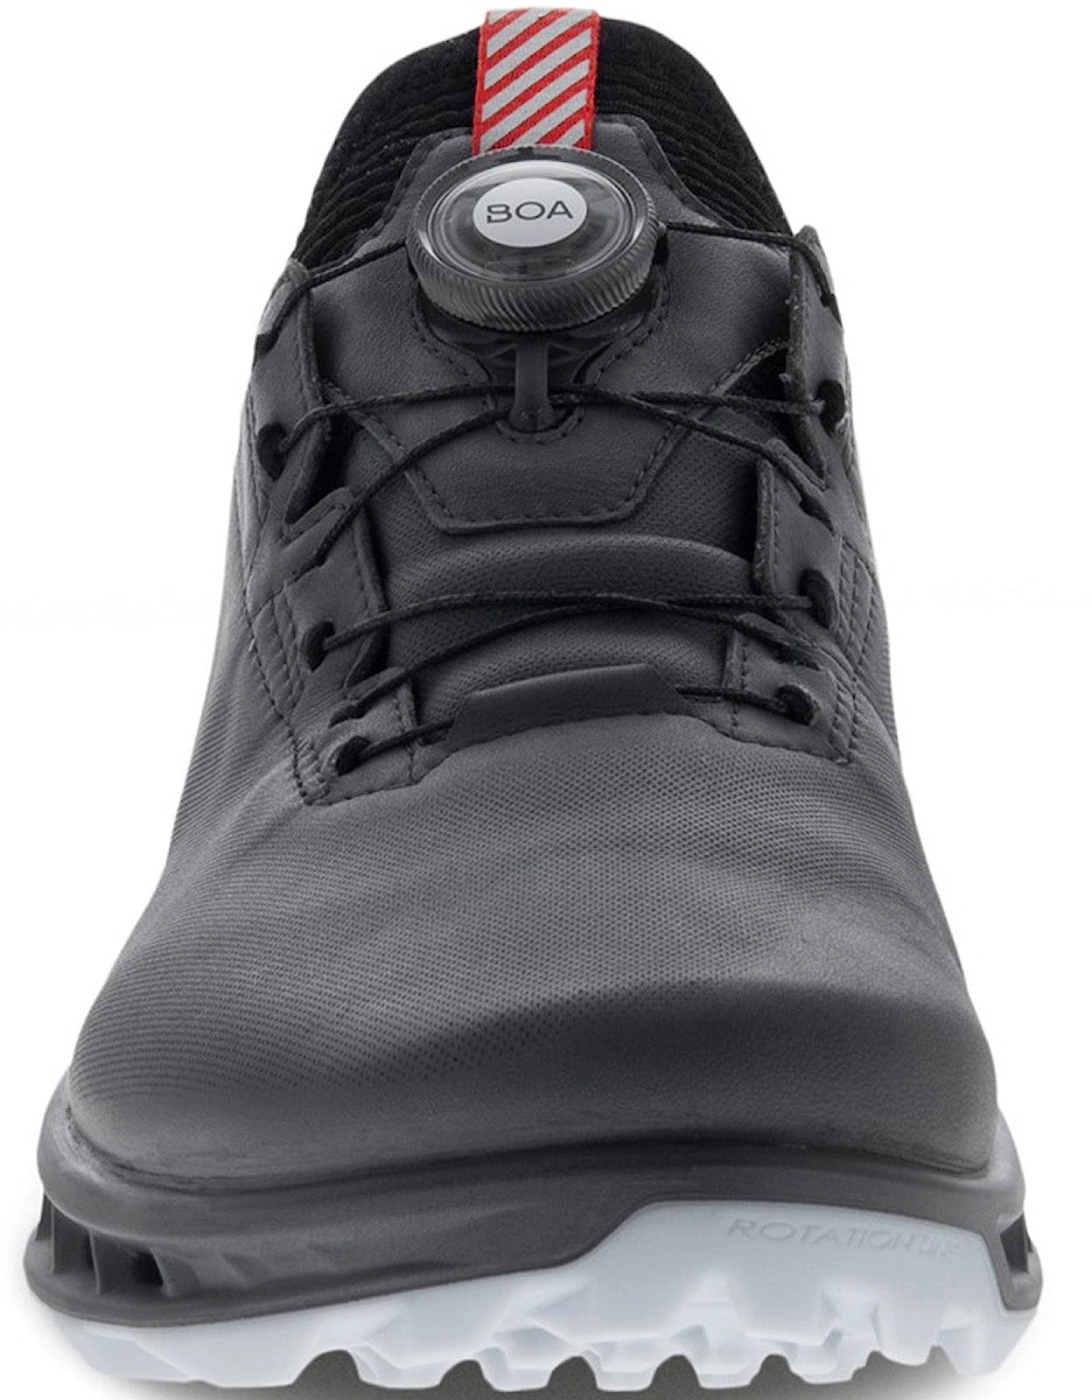 Mens Biom C4 GORE-TEX Leather Golf Shoes